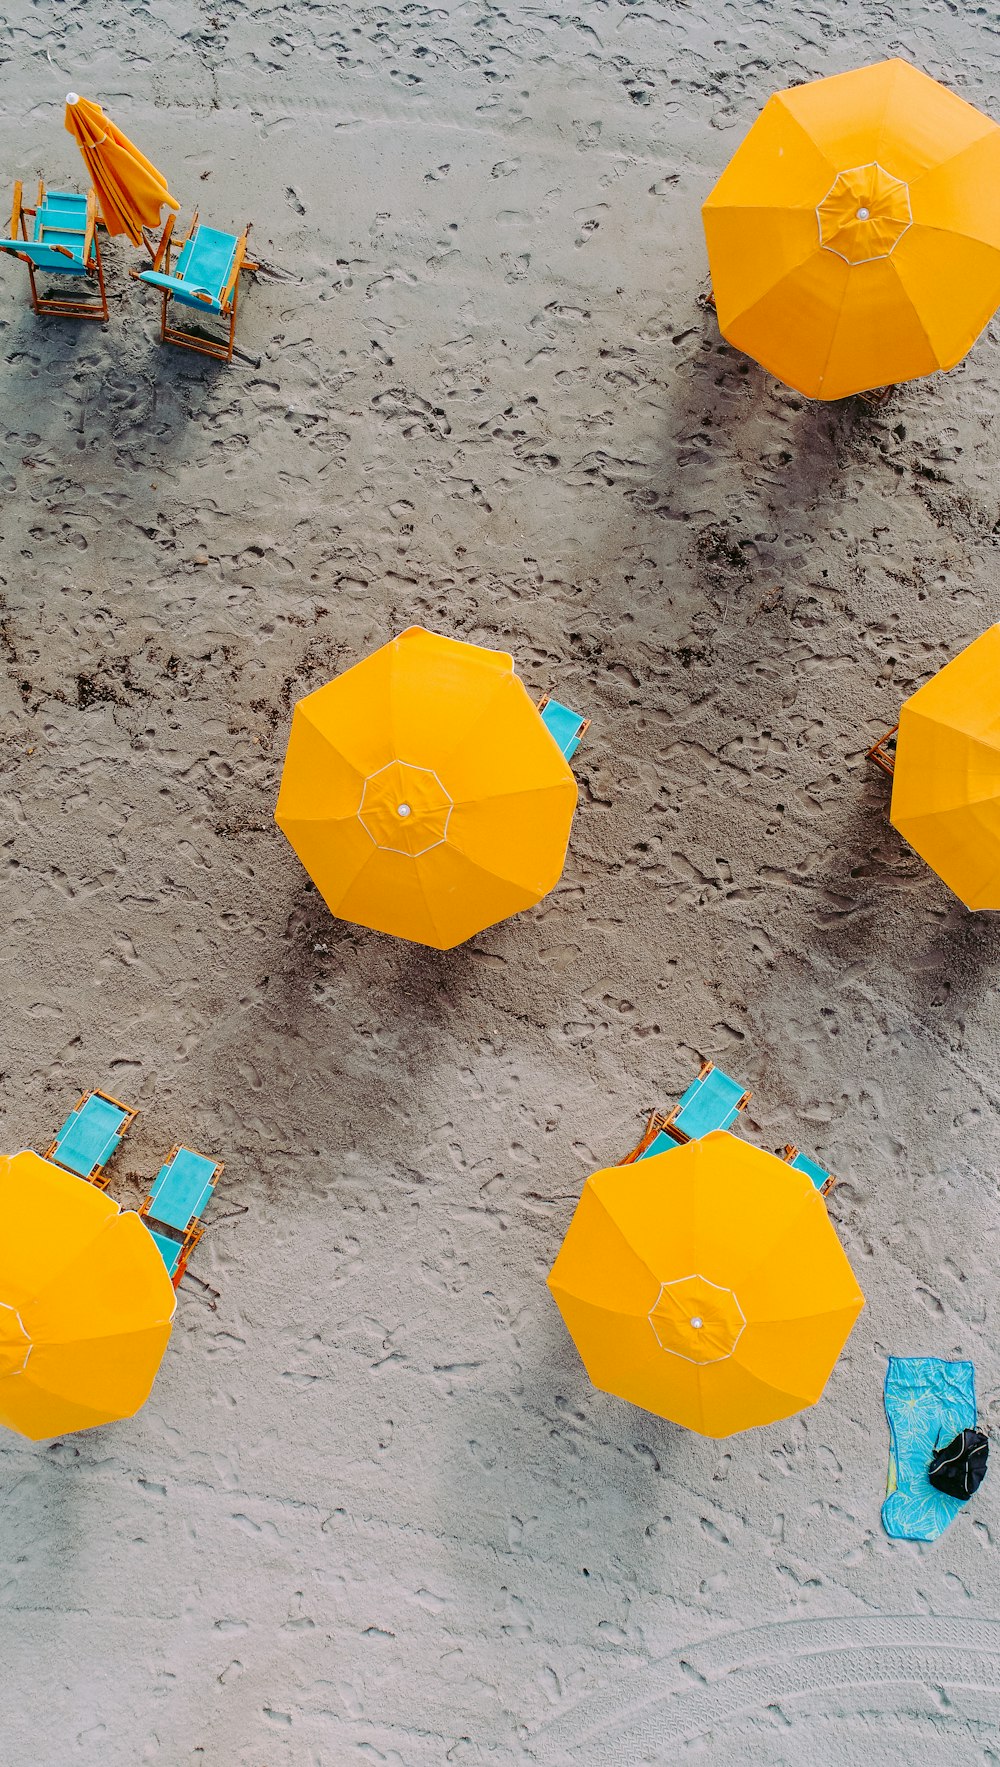 five yellow umbrellas on sand at daytime